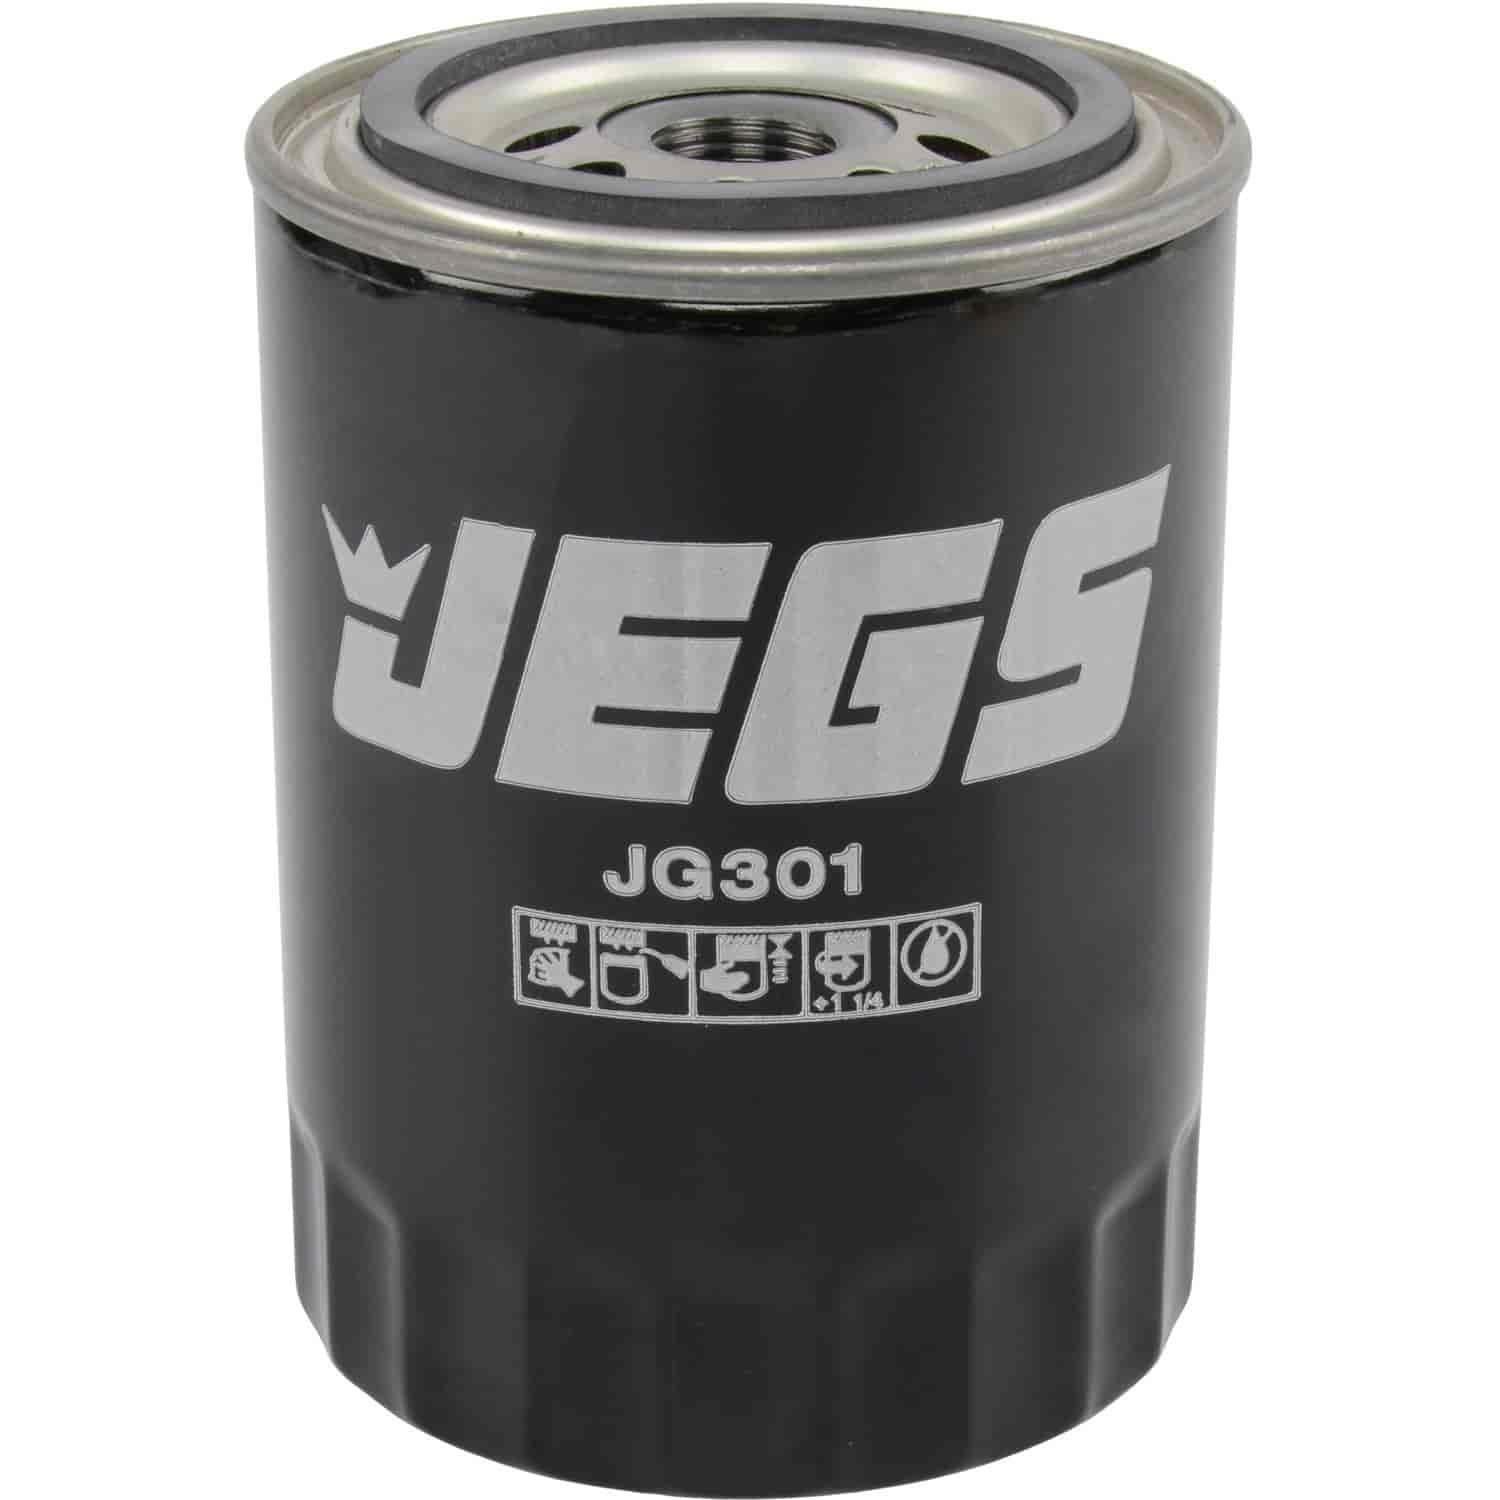 Performance Ford, Dodge Oil Filter, 5.45 in. High, 3/4"-16 UNF Thread